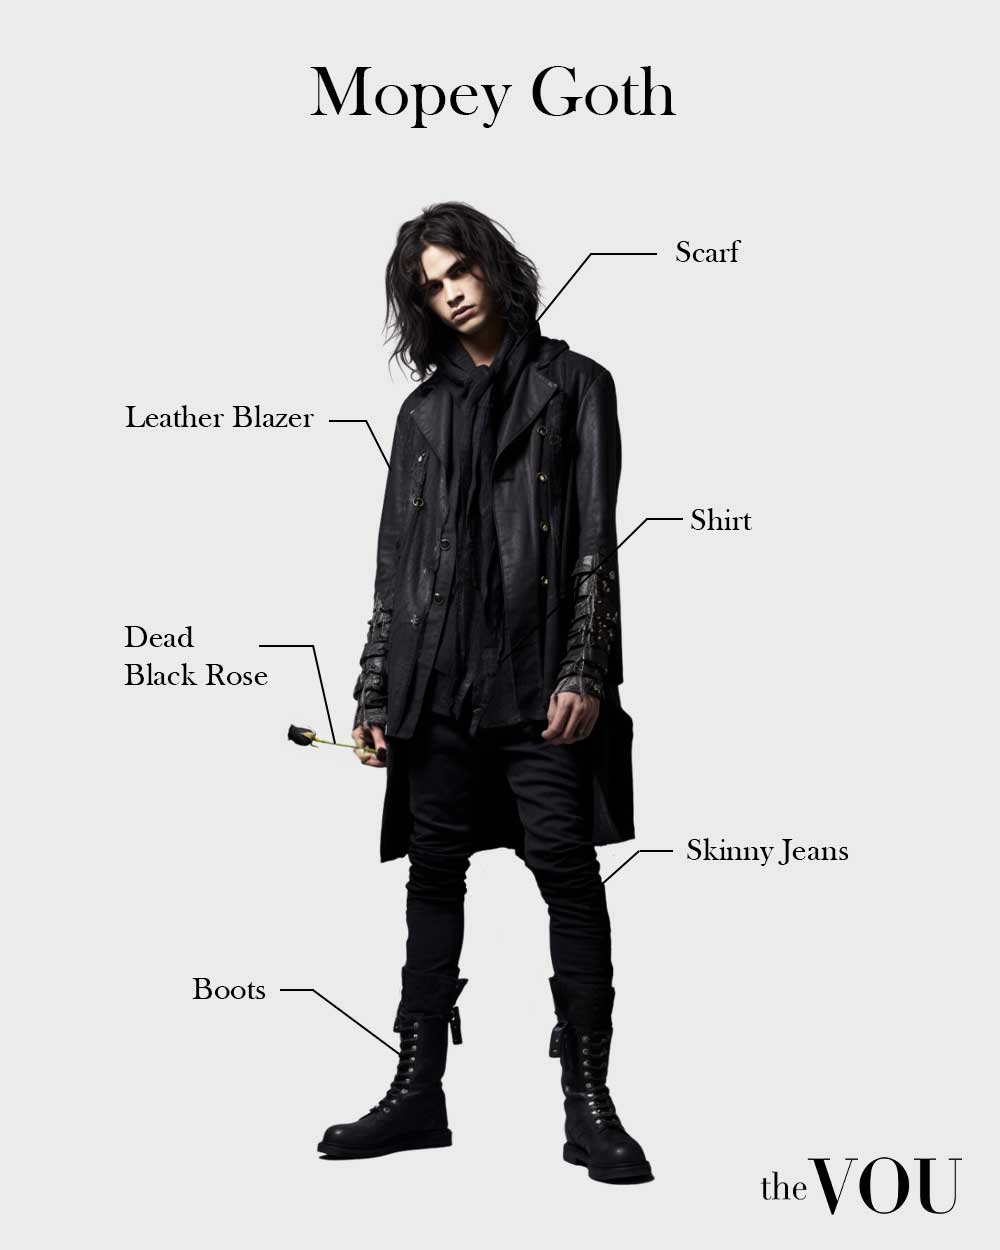 Mopey Goth outfit elements for man